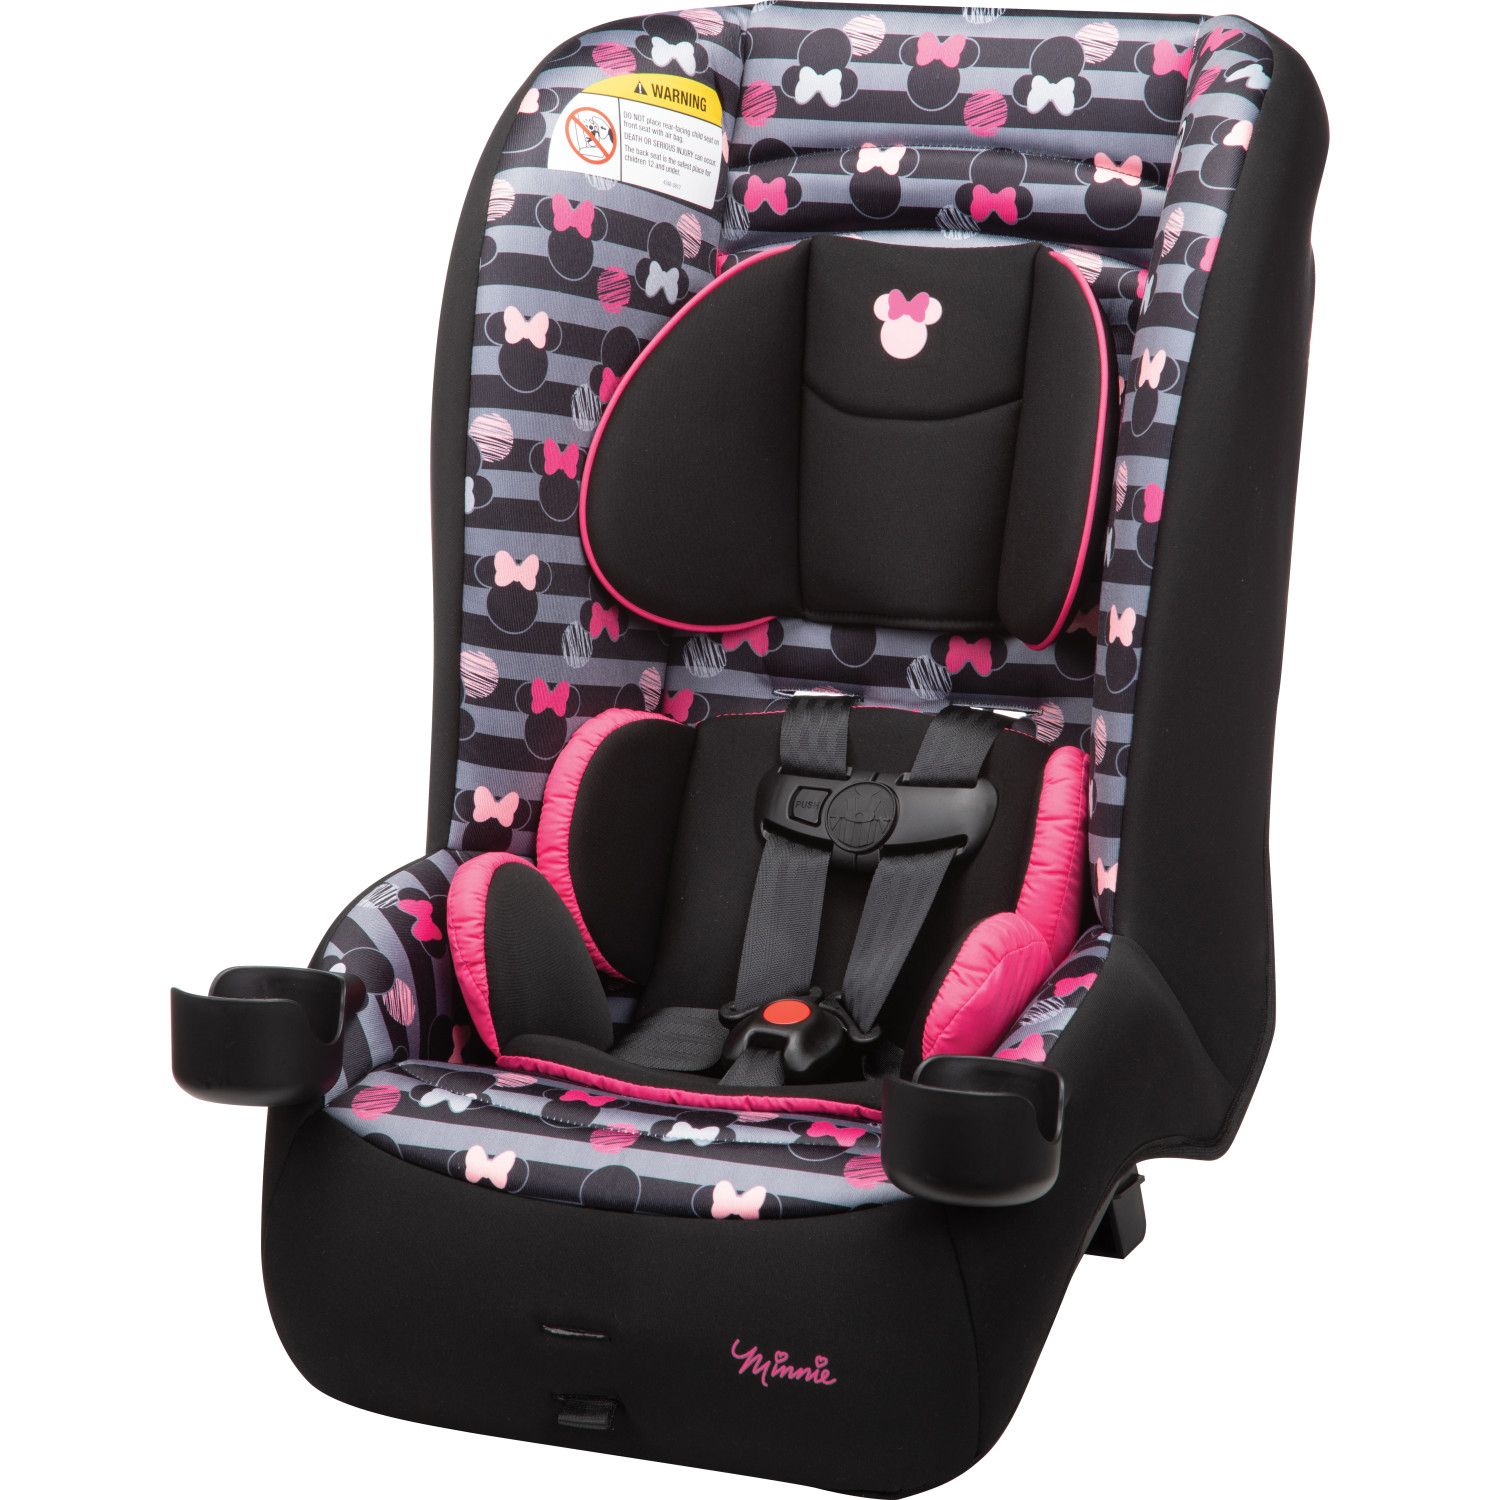 Image for Disney Minnie Mouse Jive 2-in-1 Convertible Car Seat at Kohl's.